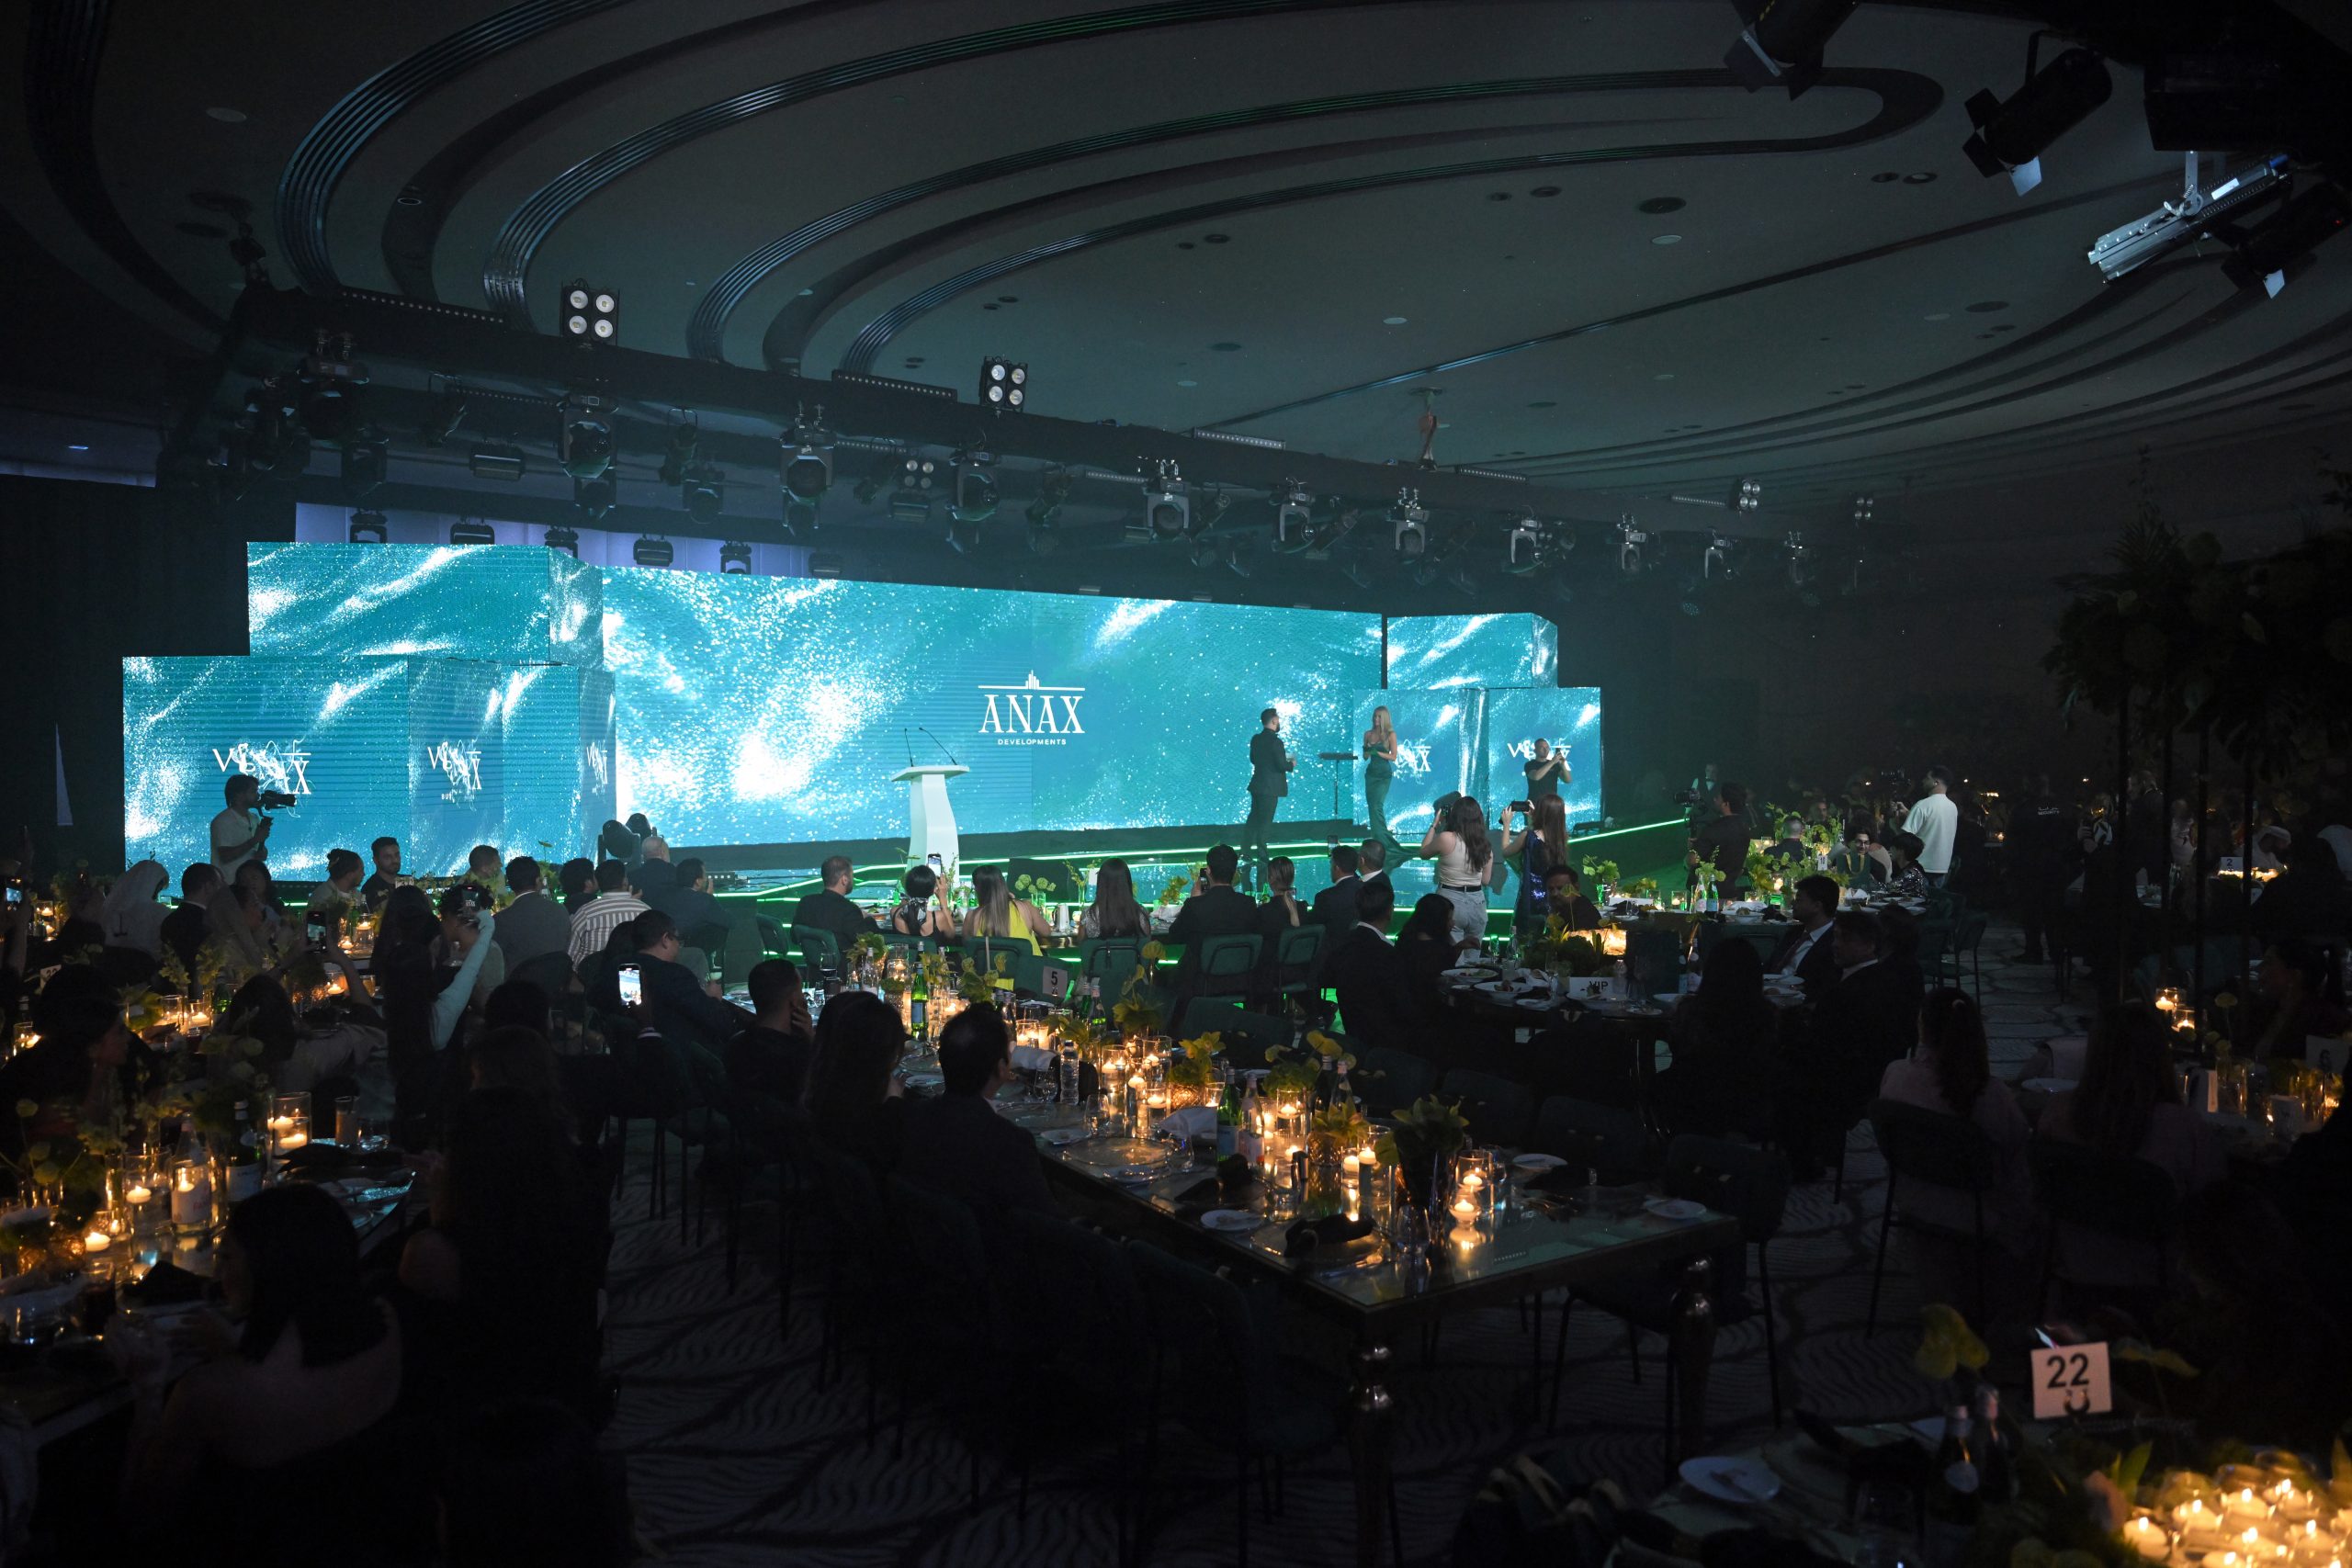 ANAX Developments Grand launch and gala dinner